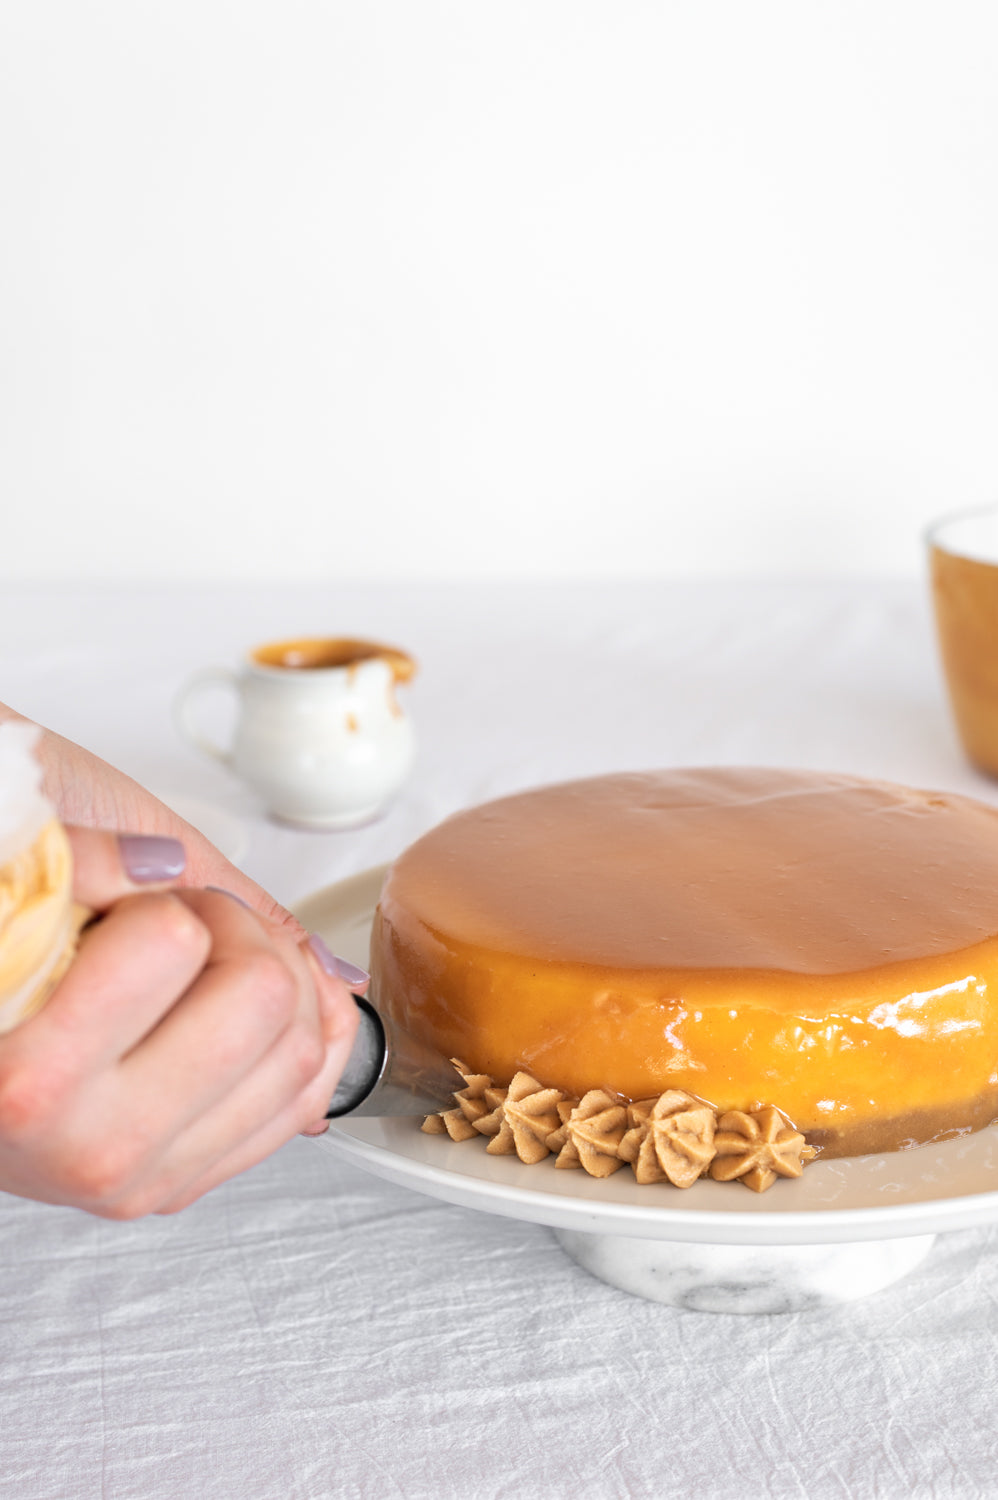 Peanut Butter Cheesecake on a cake stand